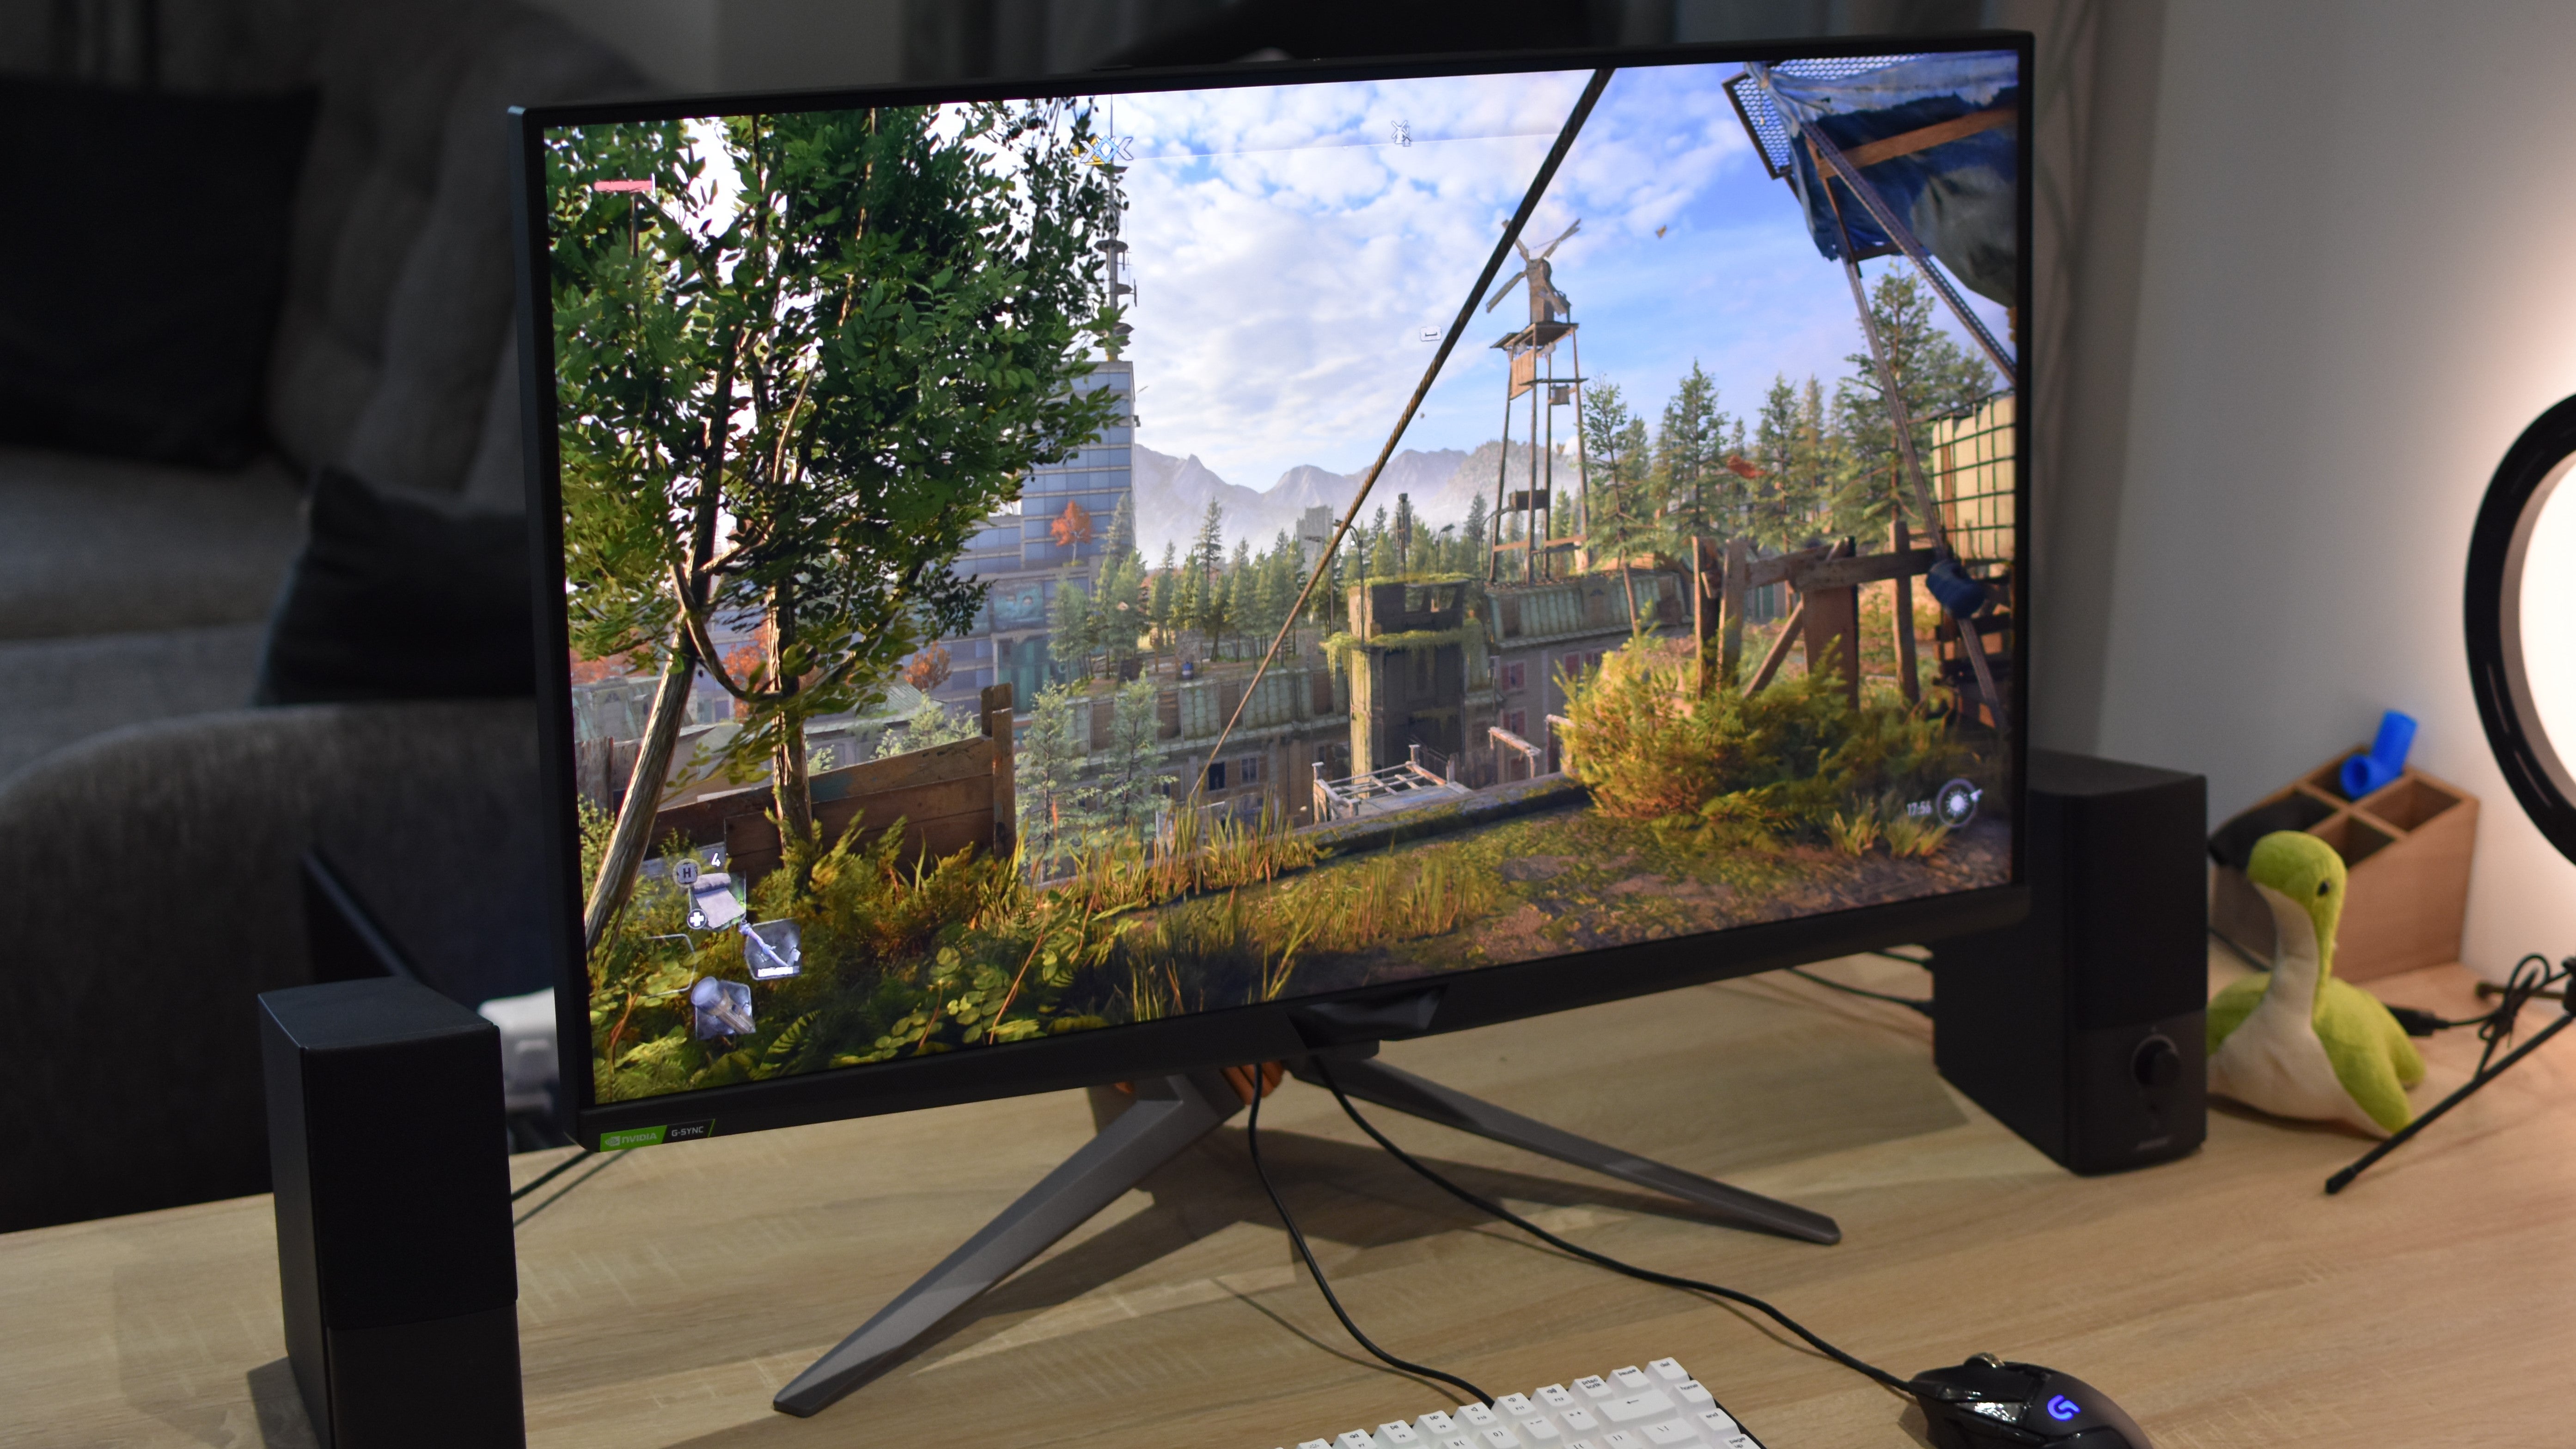 The Asus ROG Swift PG32UQX gaming monitor on a desk, running Dying Light 2.